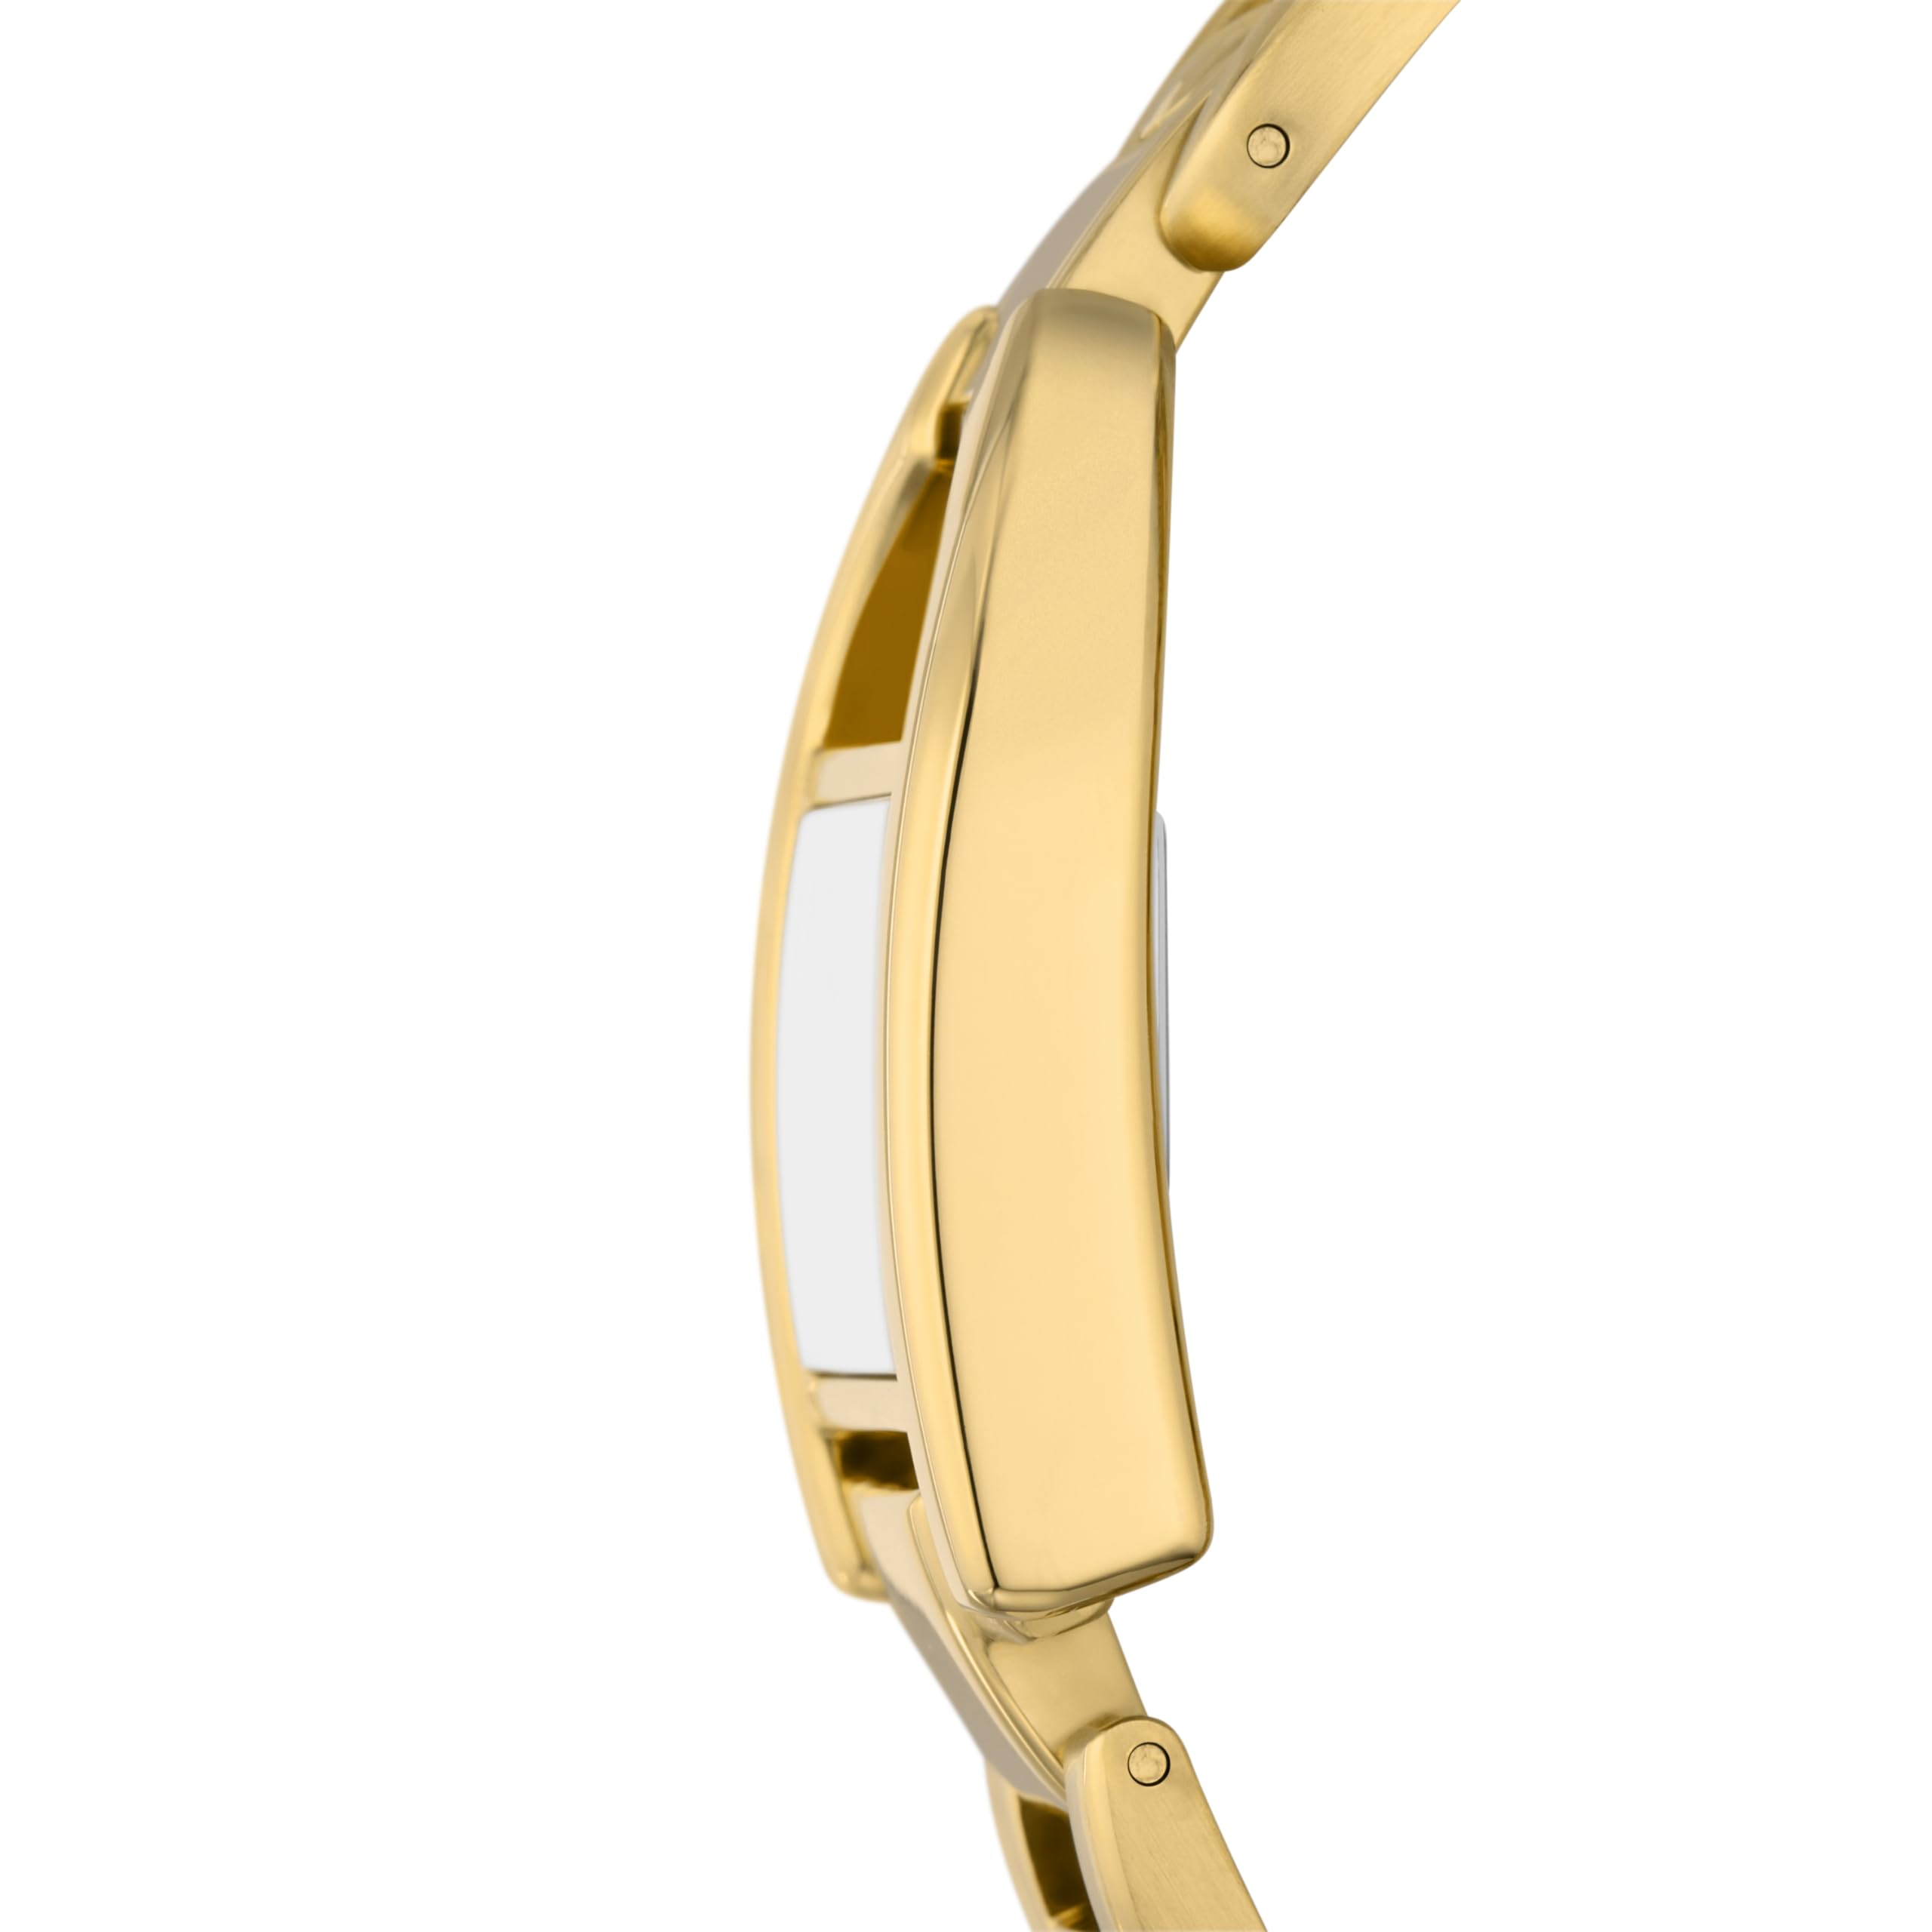 Fossil Women's Harwell Quartz Stainless Steel Three-Hand Watch, Color: Gold (Model: ES5327)